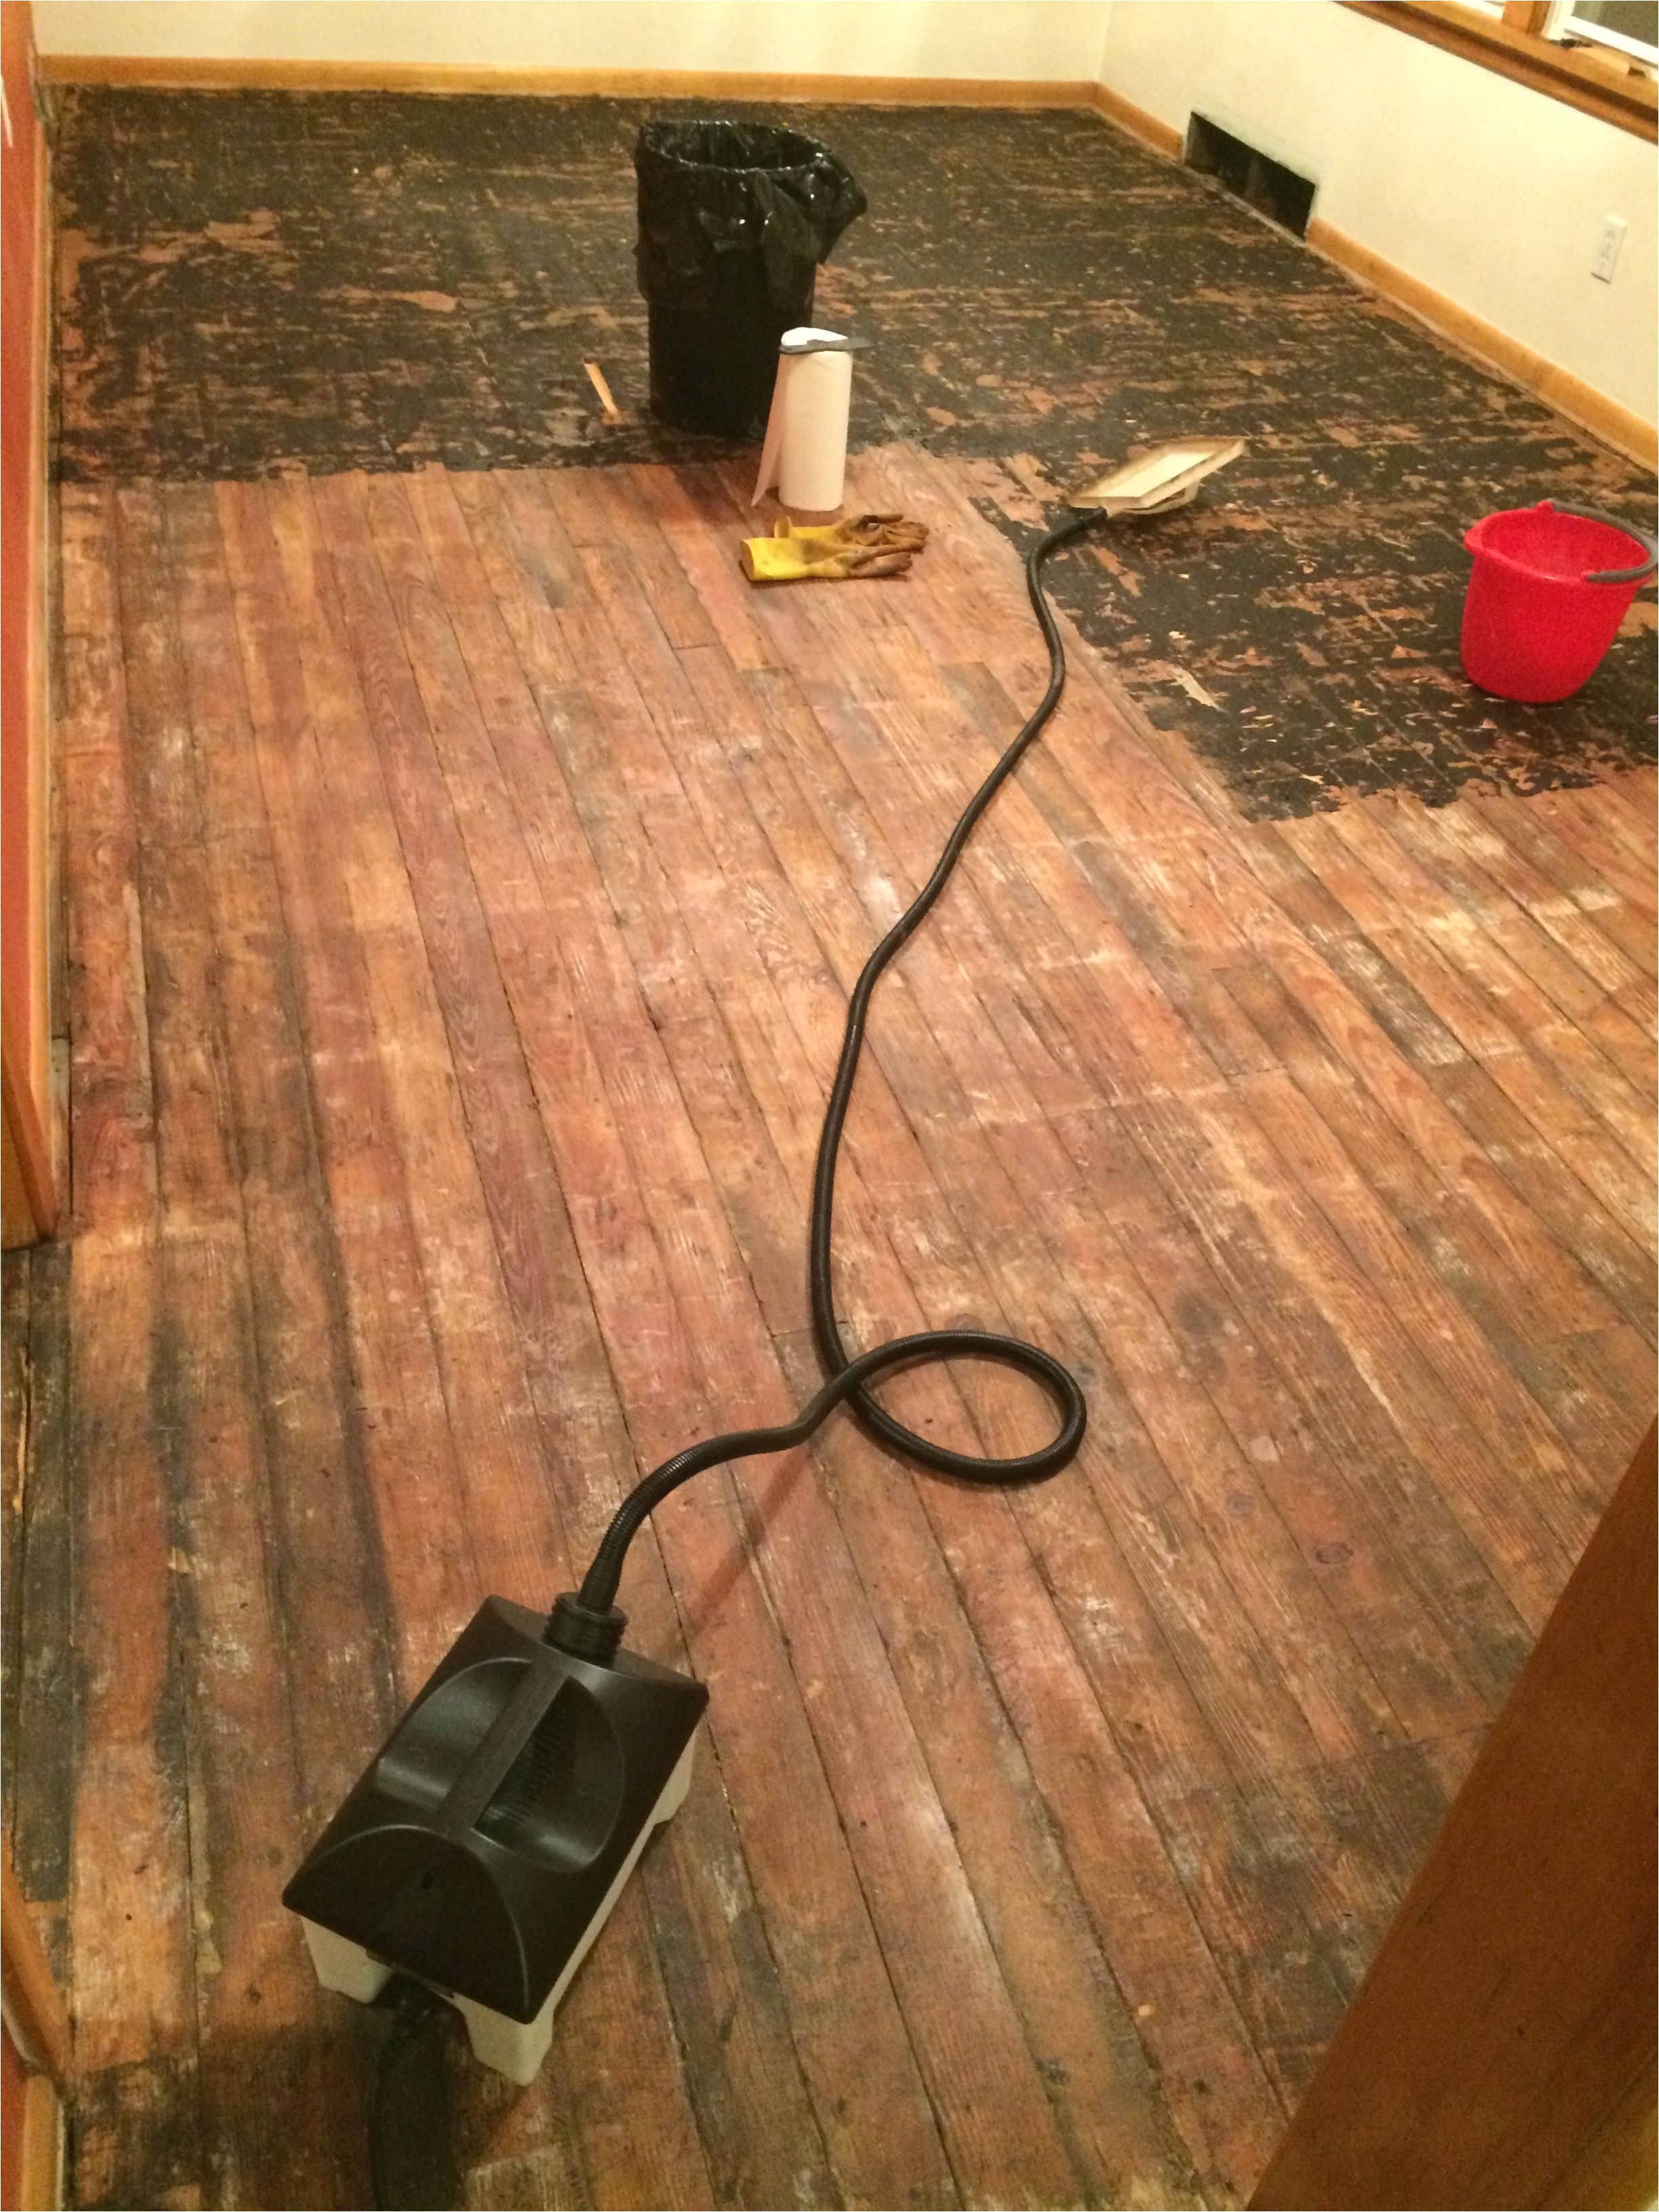 Removing Tar Glue From Hardwood Floors 40 How to Remove Glued Down Wood Flooring Images